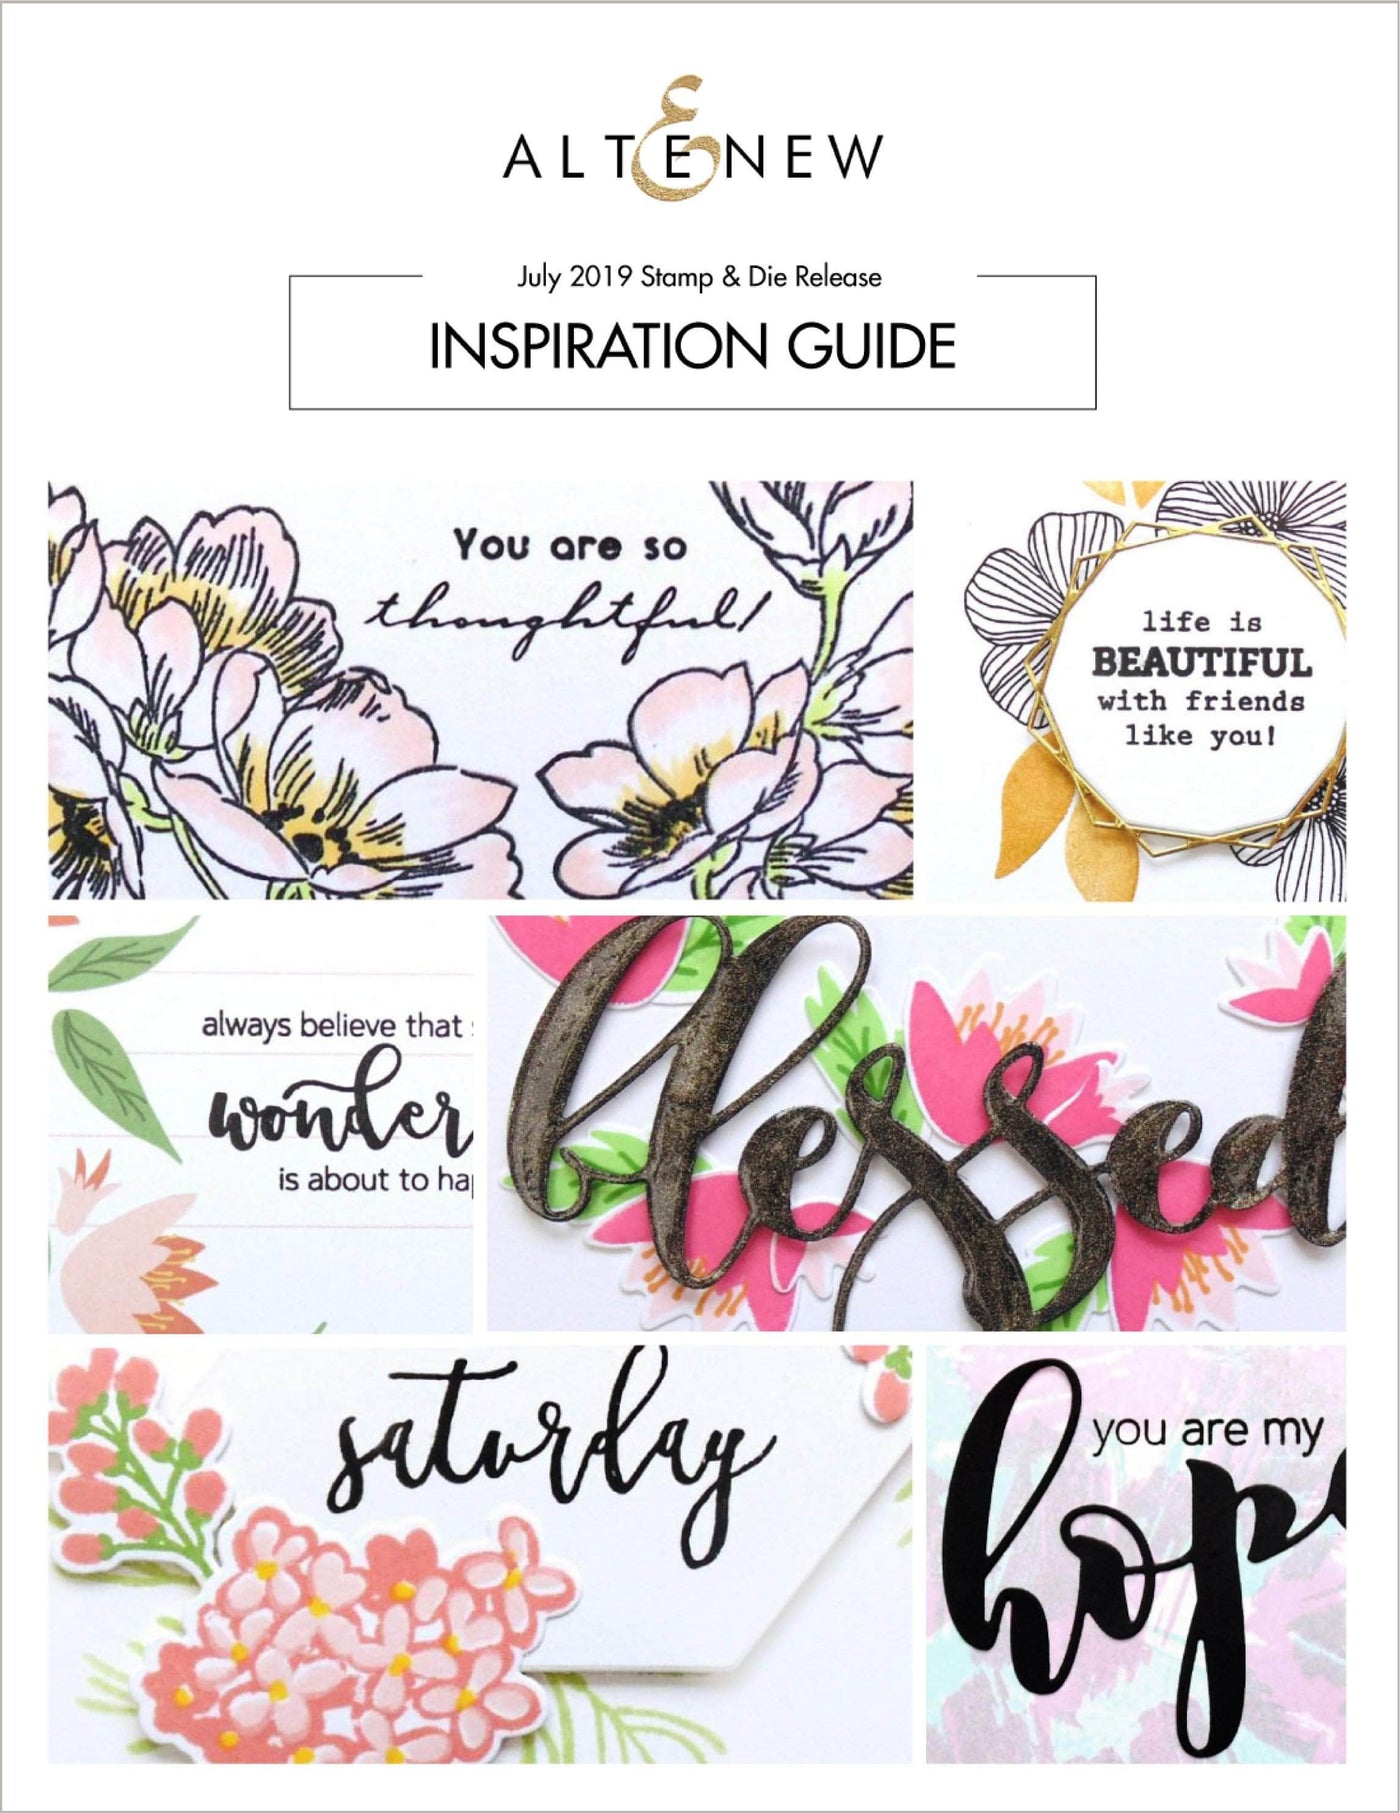 55Printing.com Printed Media Blessed With Hope Stamp & Die Release Inspiration Guide